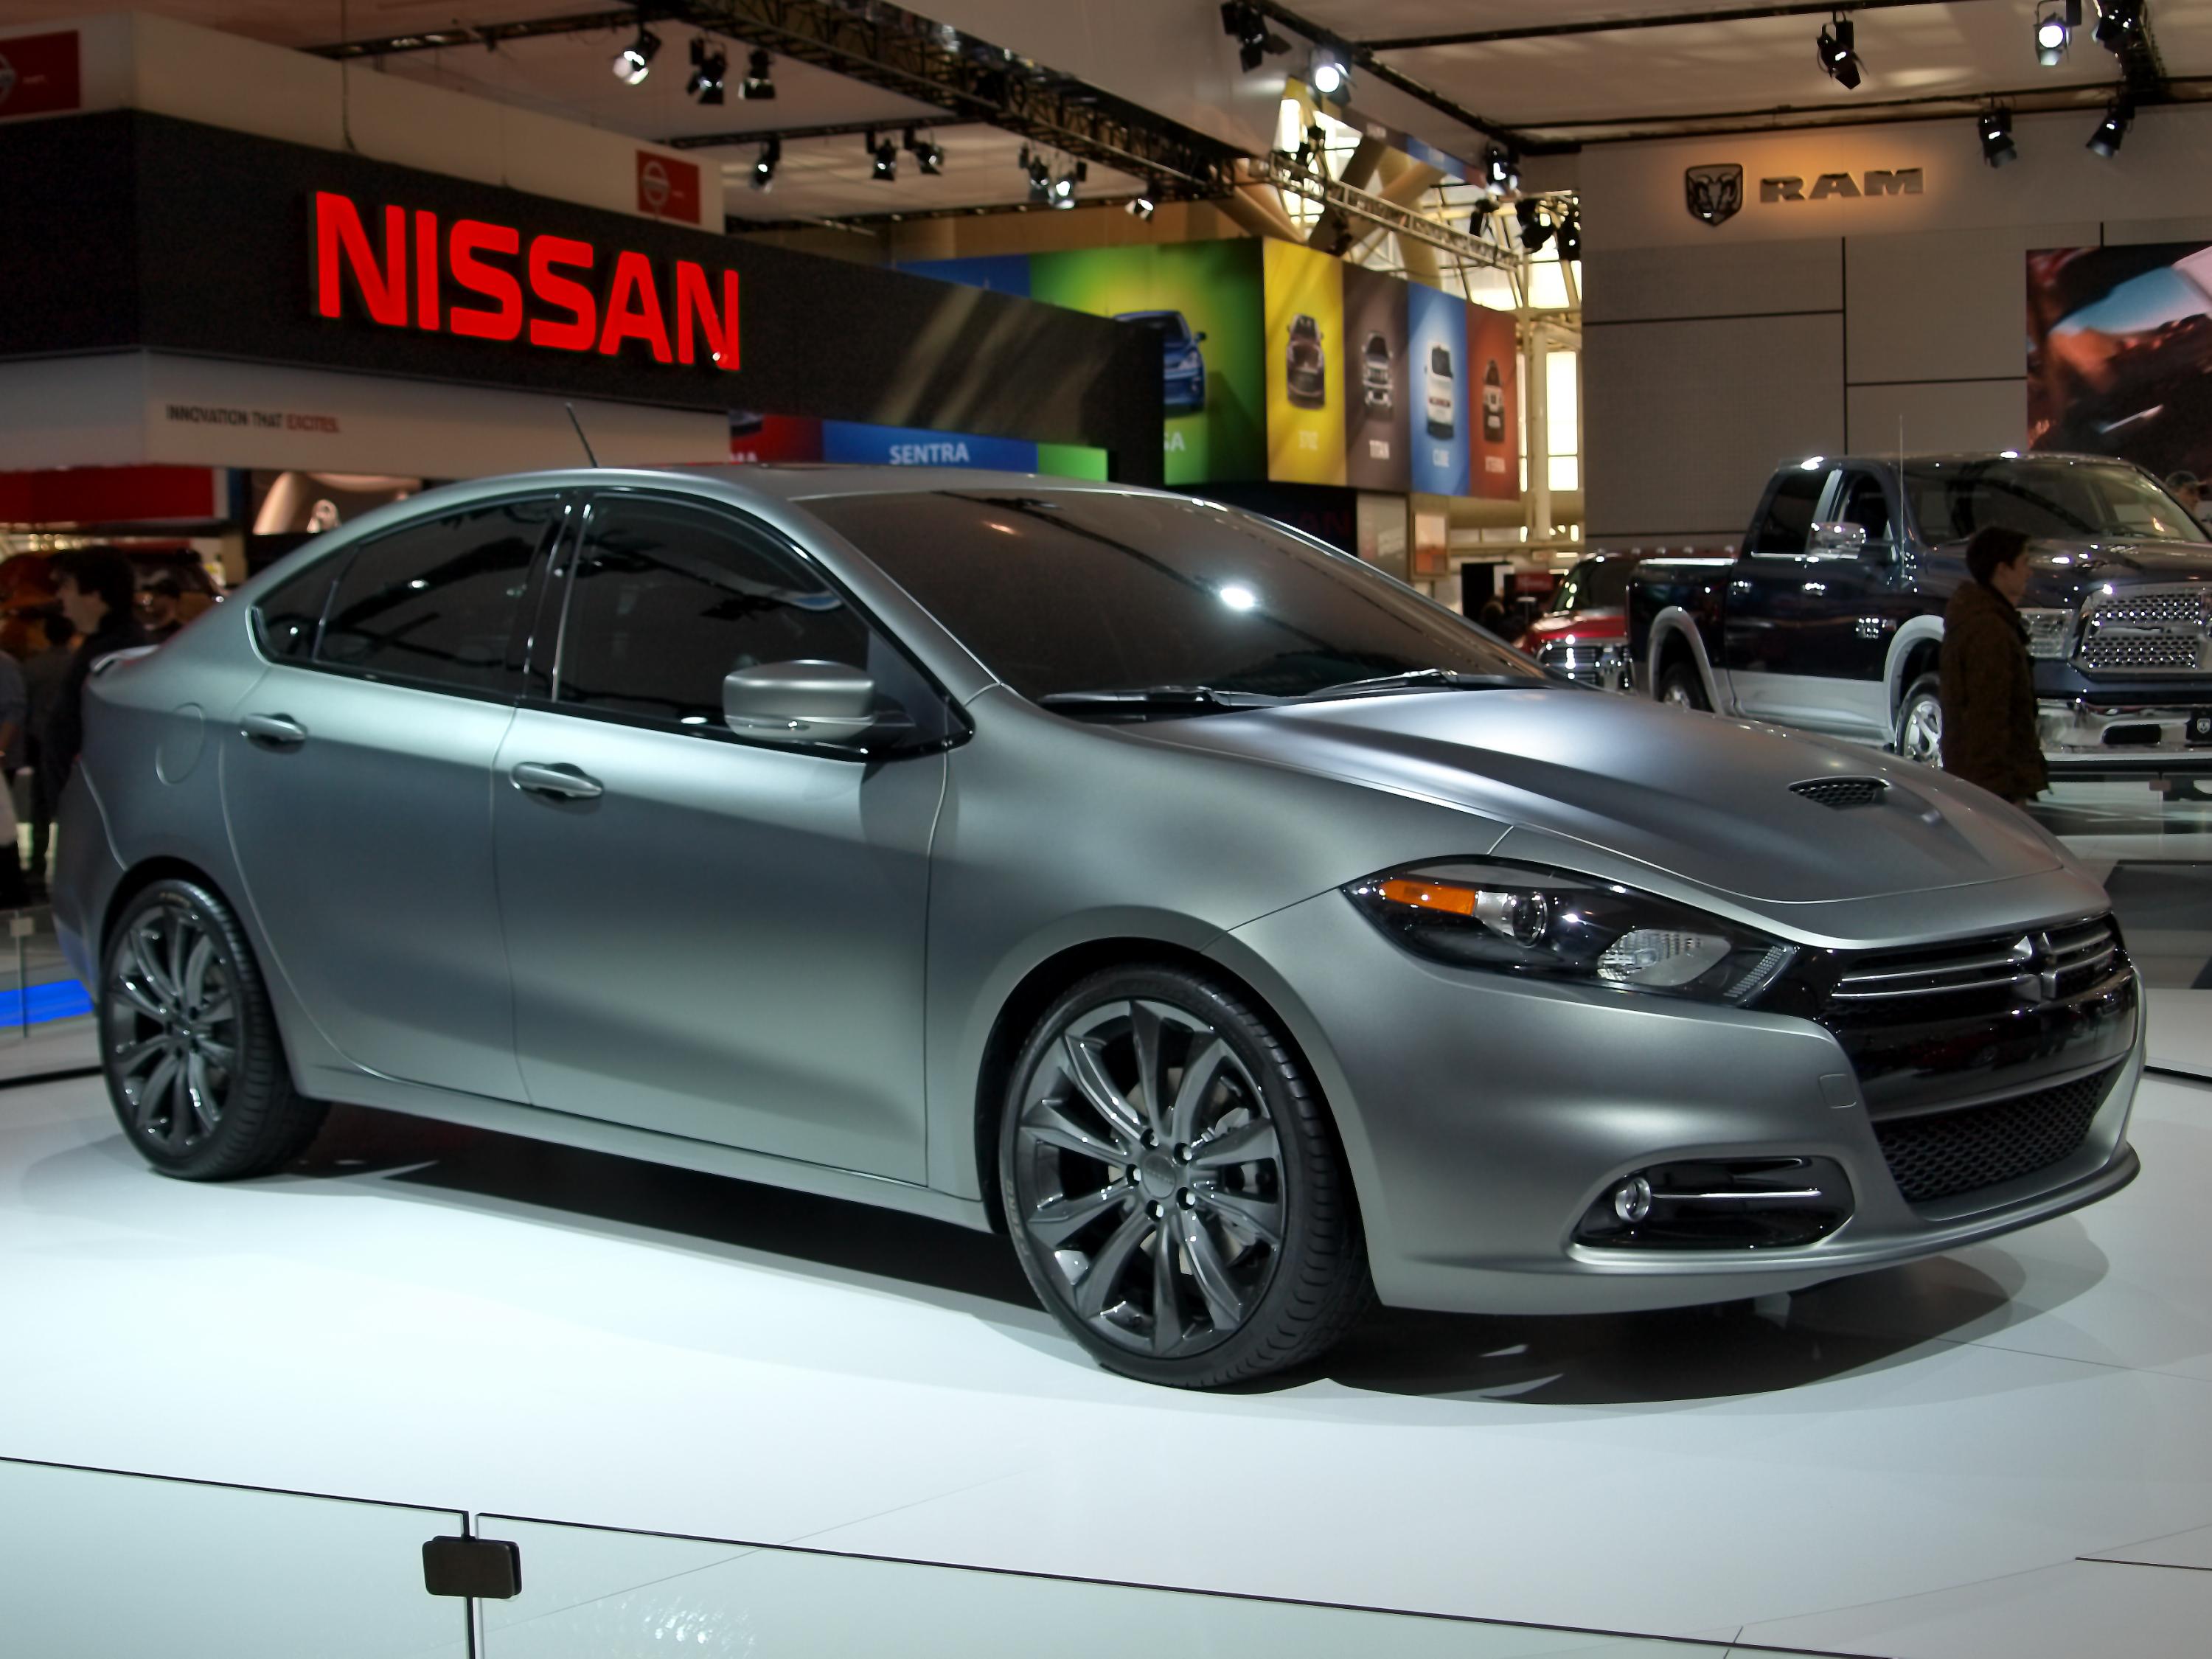 Dodge Dart GT High Quality Background on Wallpapers Vista